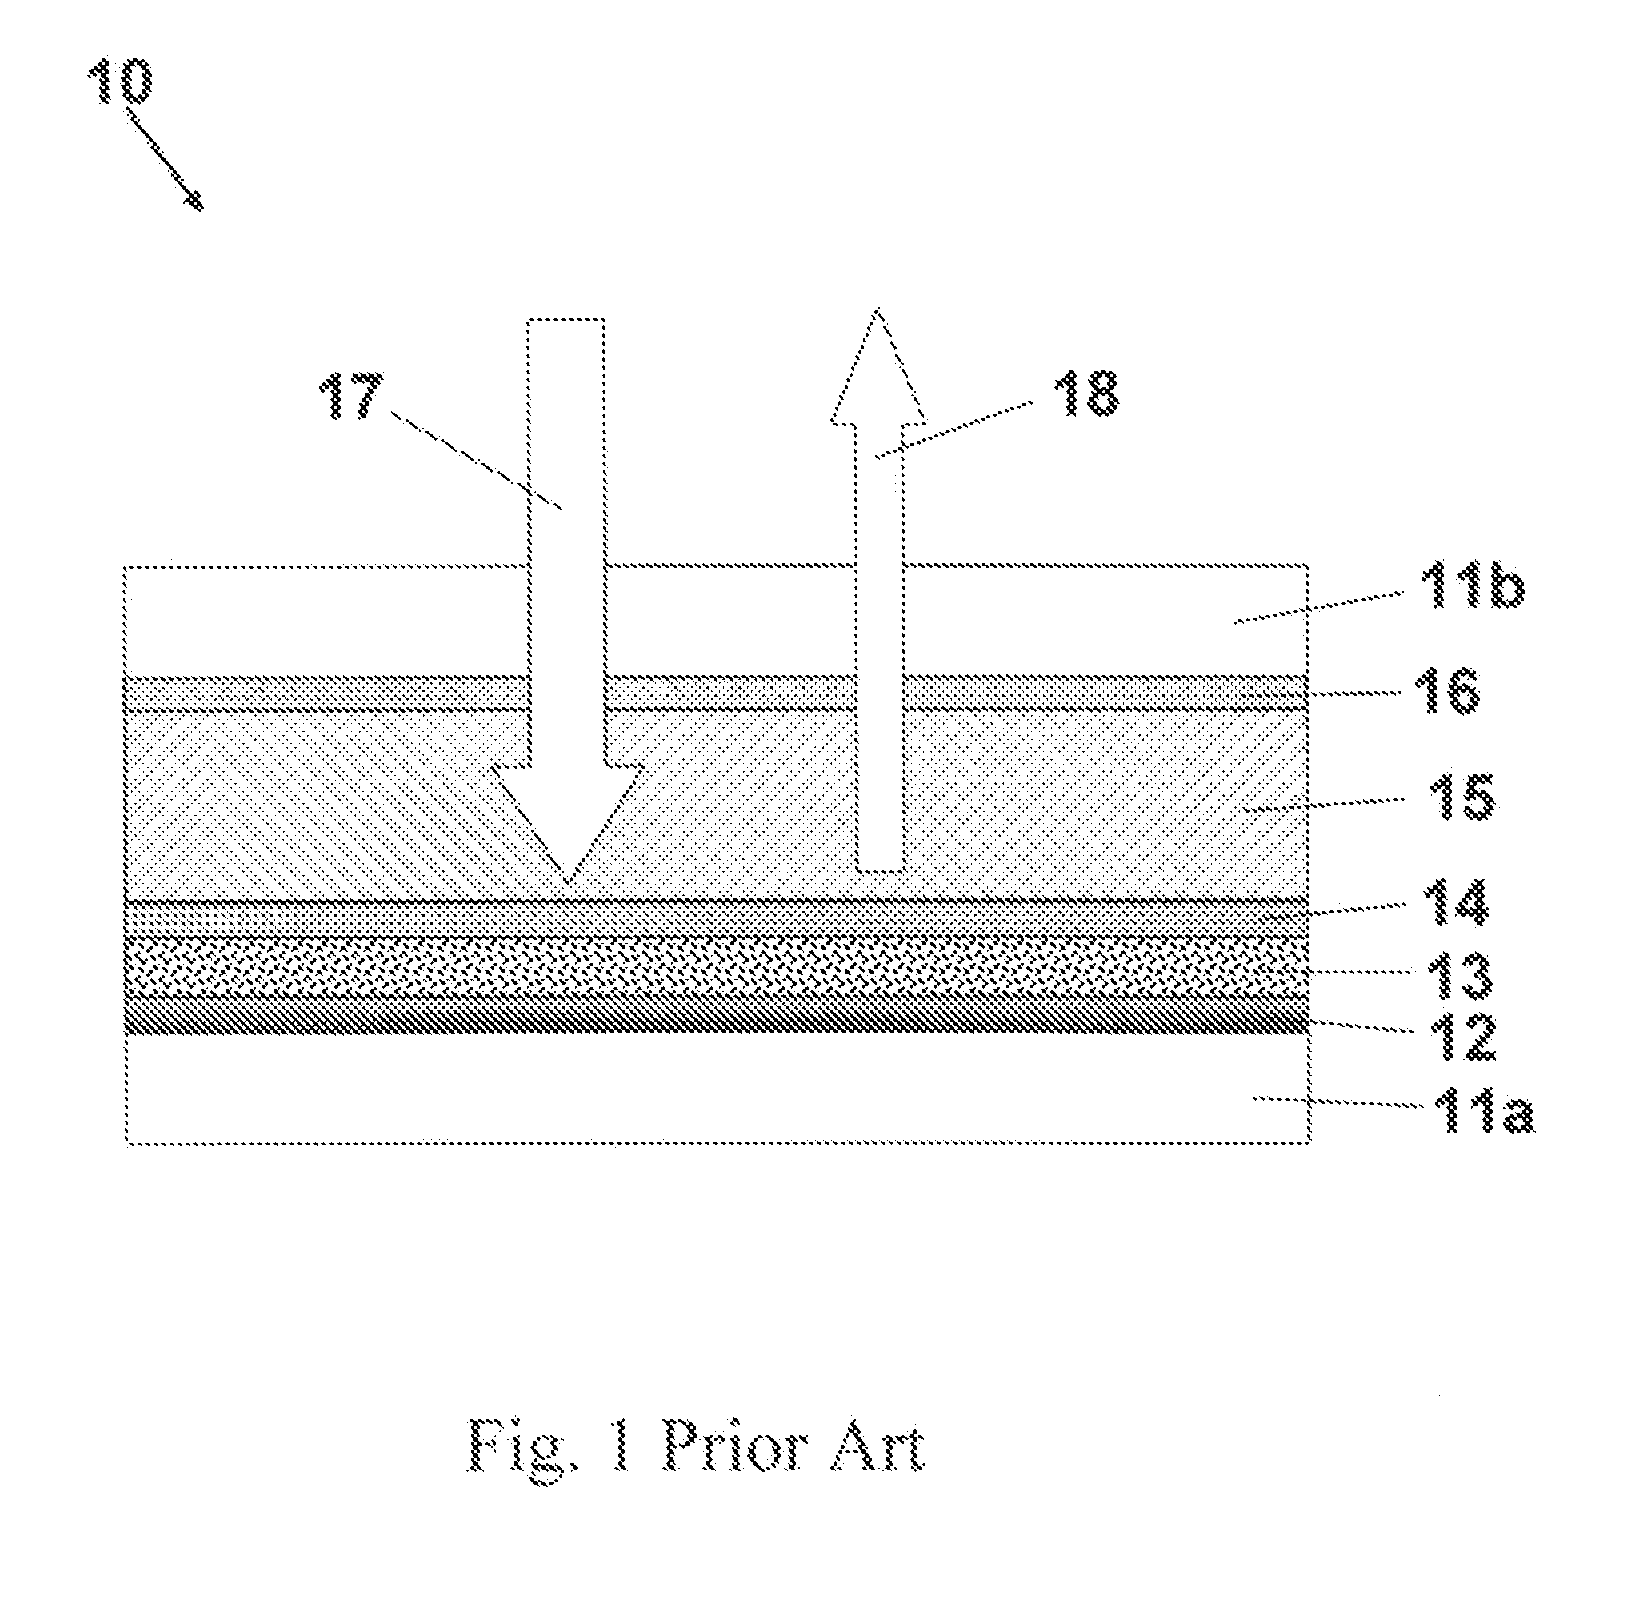 Liquid Crystal Displays with Embedded Photovoltaic Cells